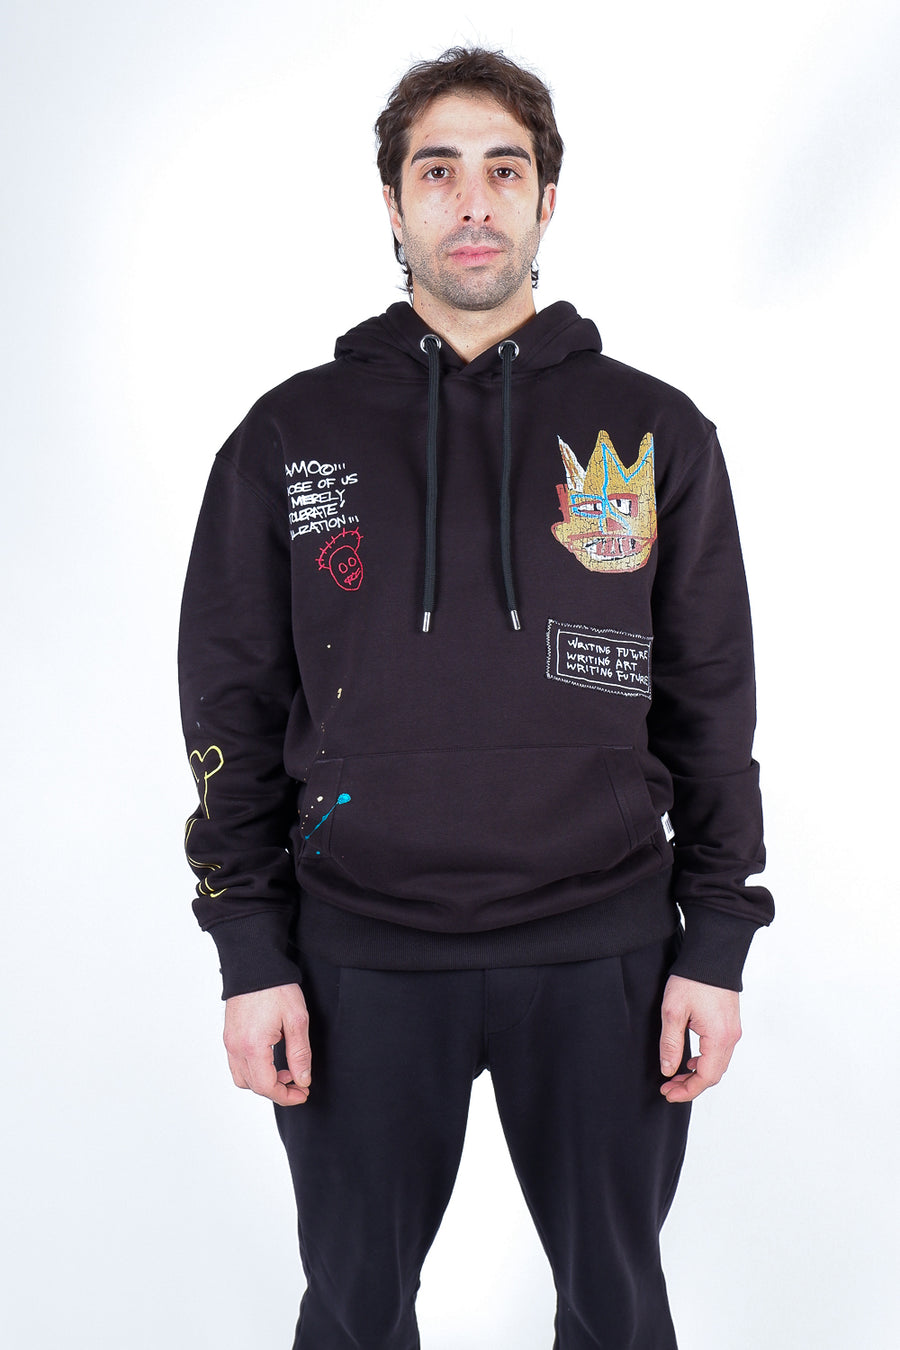 Buy the ABE Basquiat Scribe Hoodie in Black at Intro. Spend £50 for free UK delivery. Official stockists. We ship worldwide.